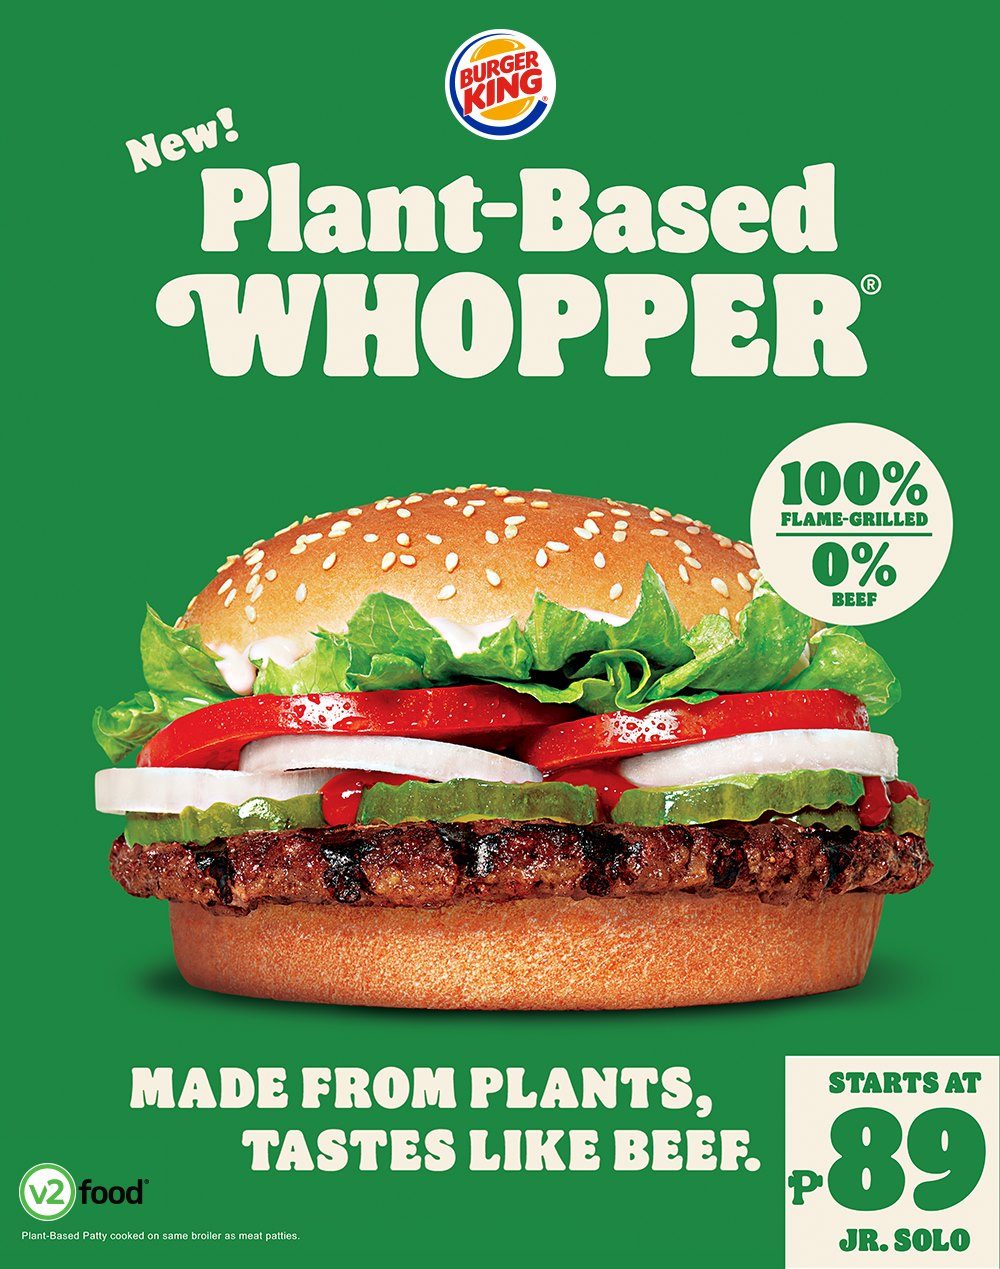 Burger King launches plant-based Whopper in PH